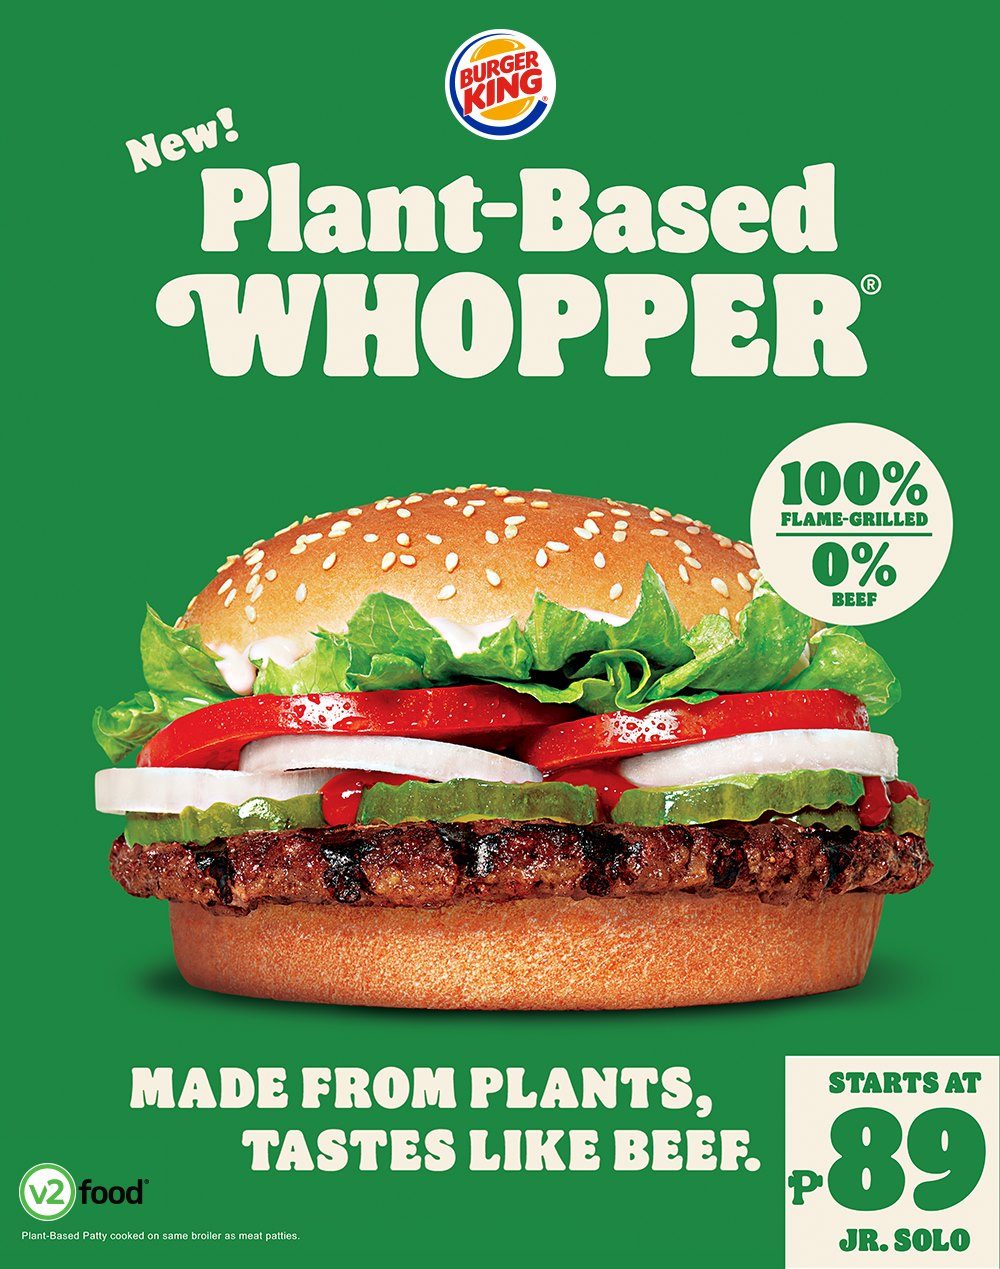 Burger King launches plant-based Whopper in PH